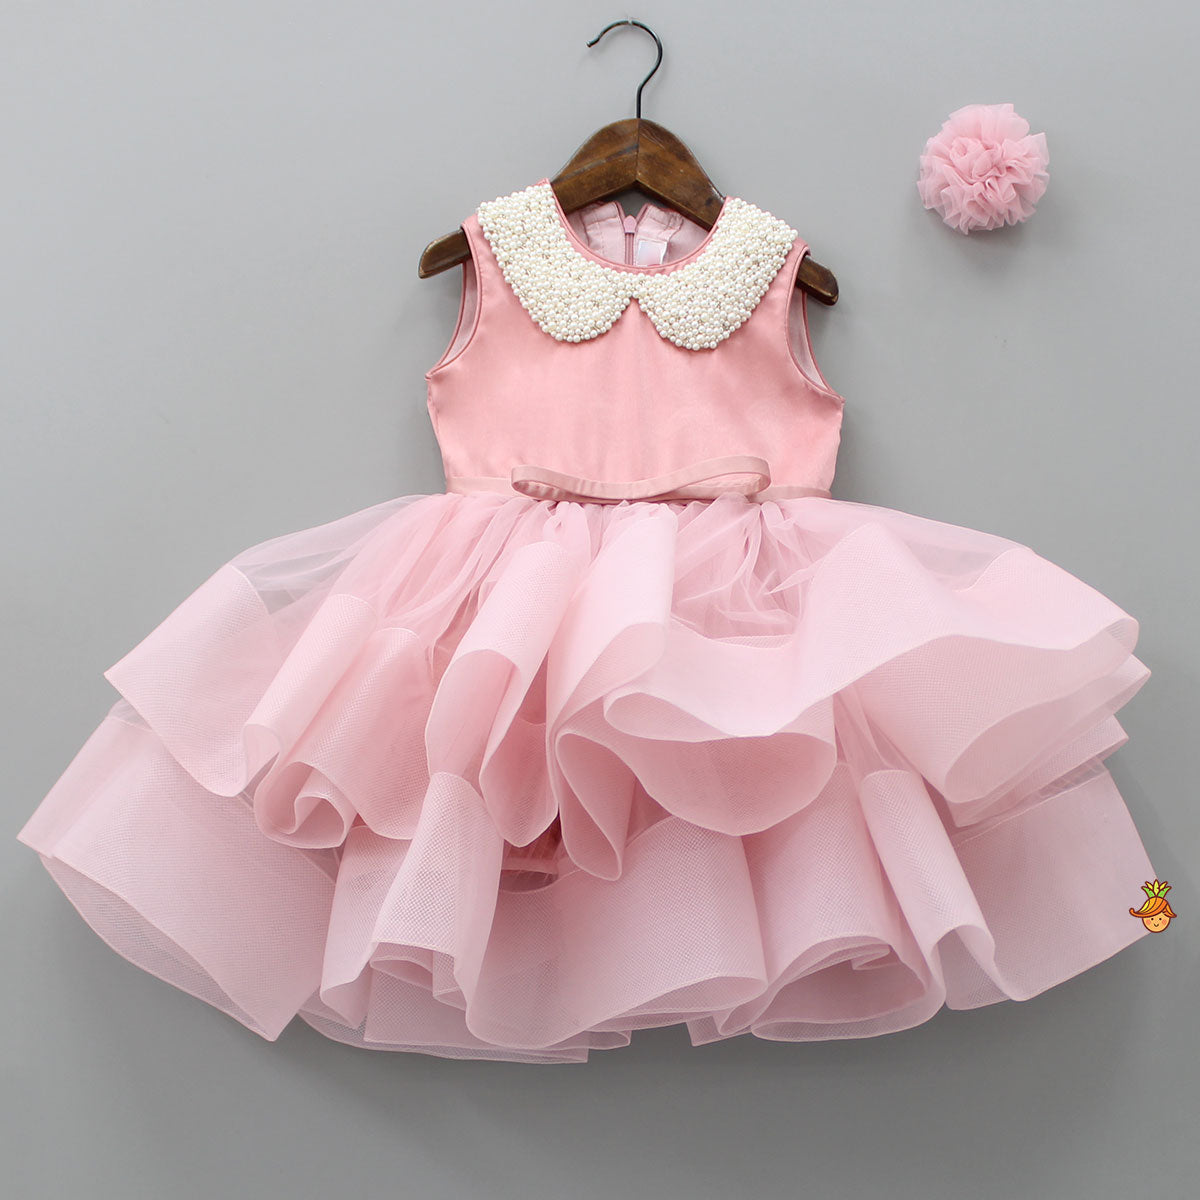 Elegant Pearls Embellished Onion Pink Ruffle Dress With Floral Hair Clip